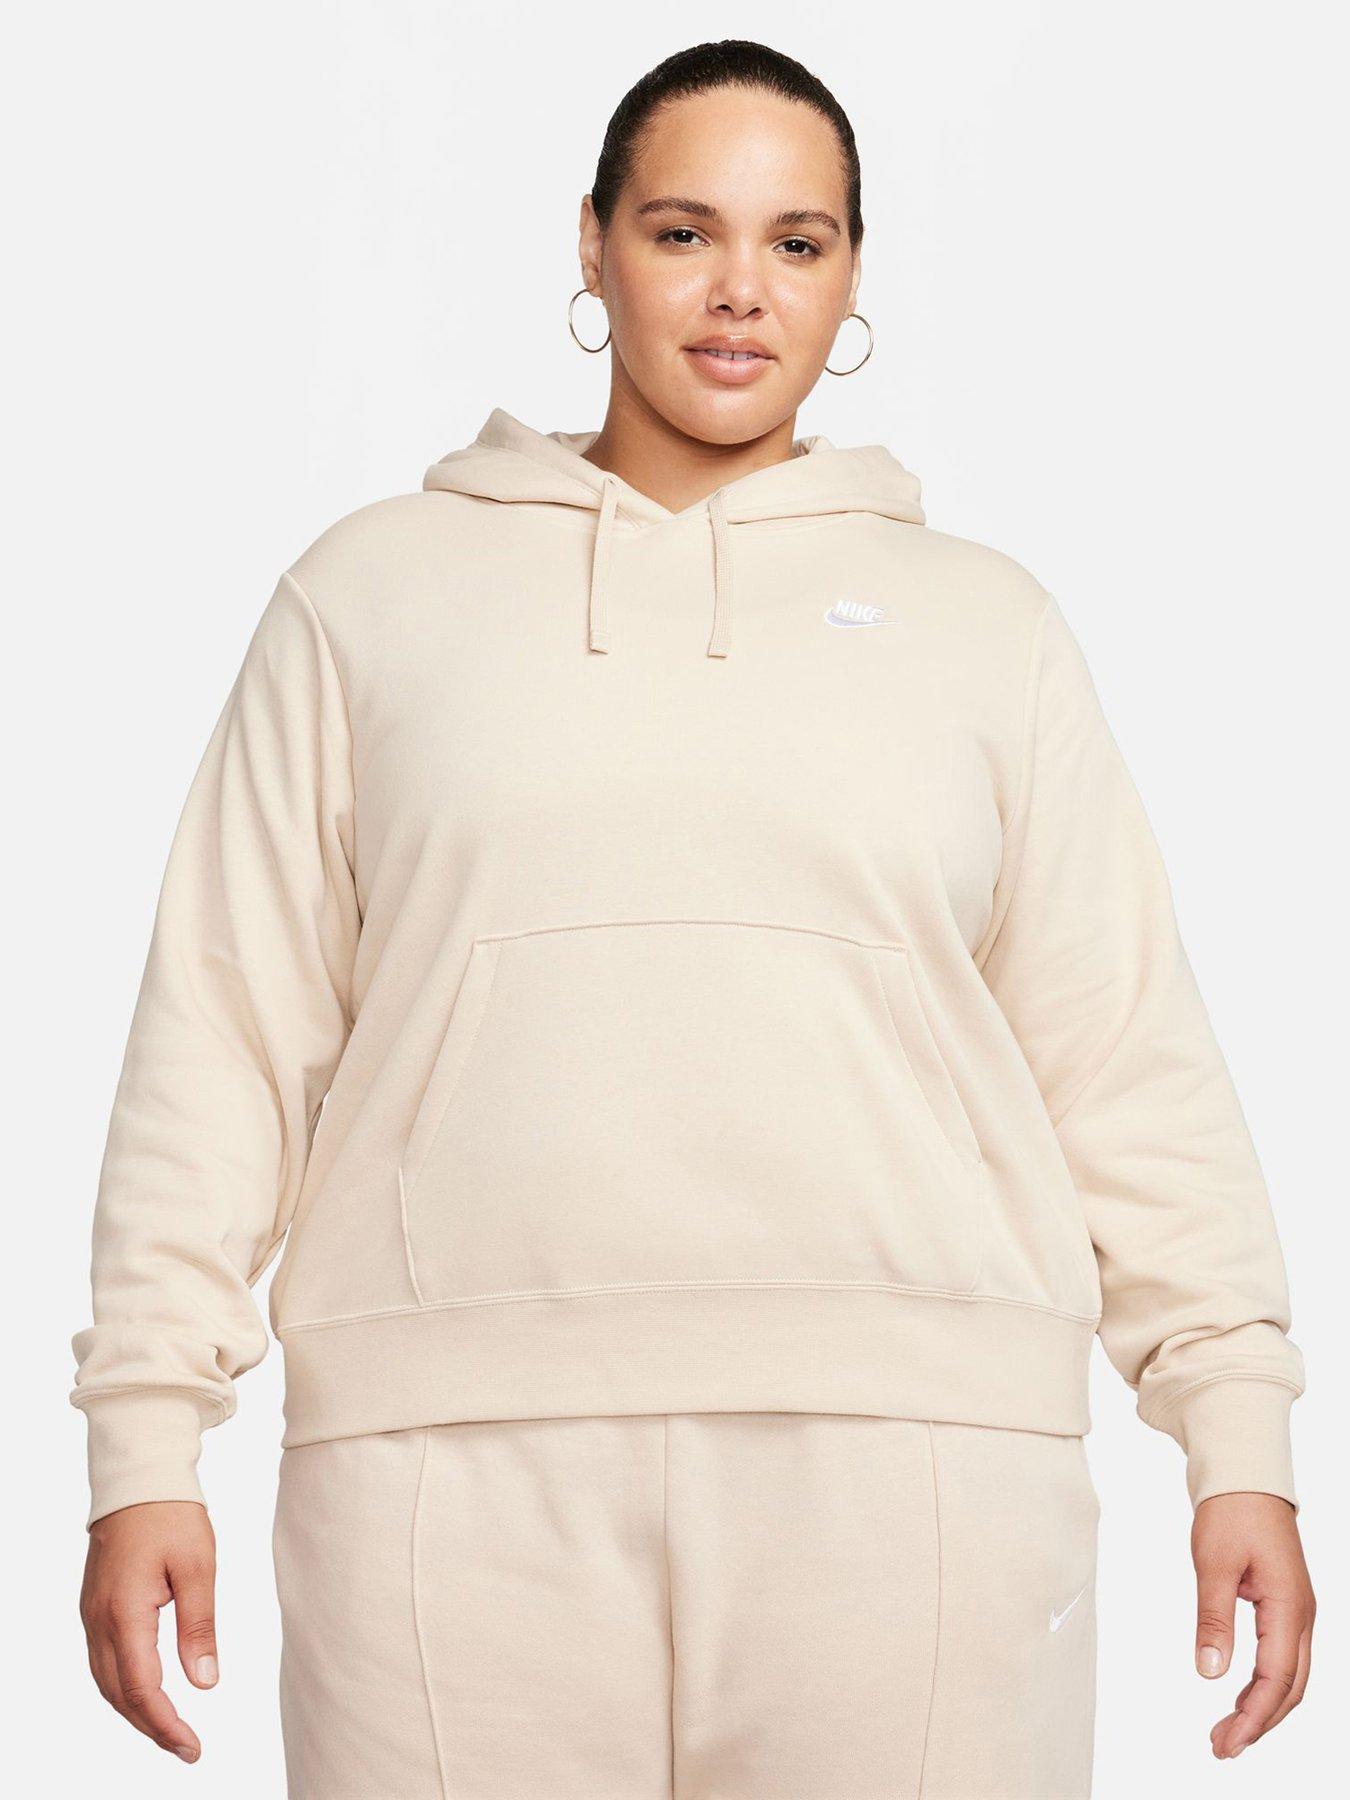 Shop Womens Nike Jumper and Pullovers at Very Ireland